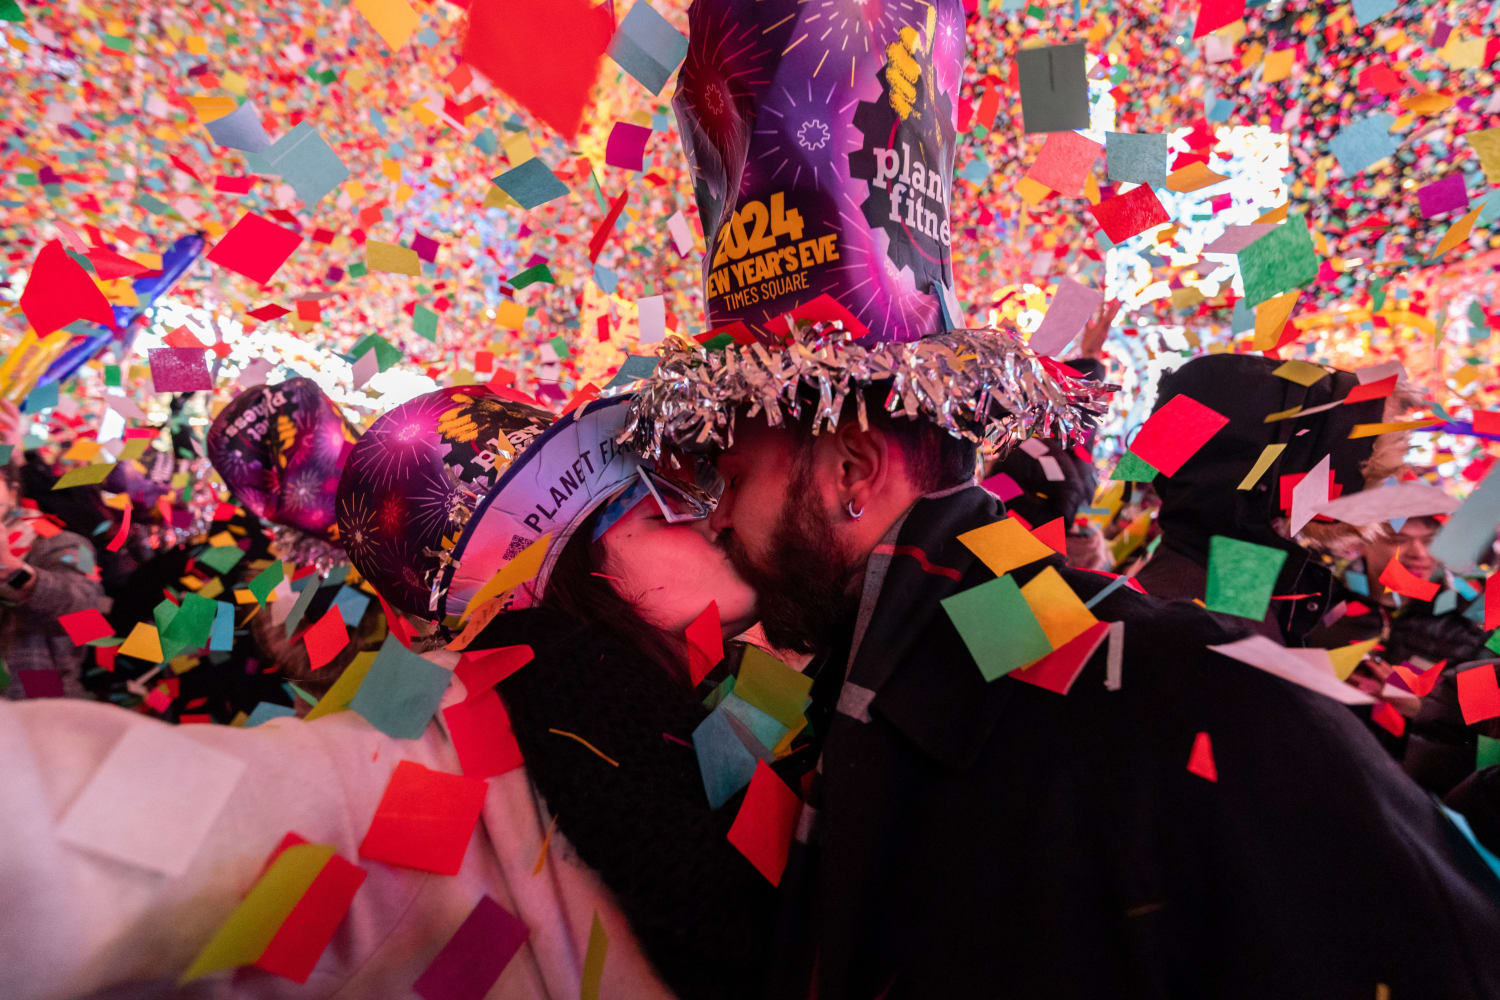 Organizers test confetti drop ahead of New Year's Eve in Times